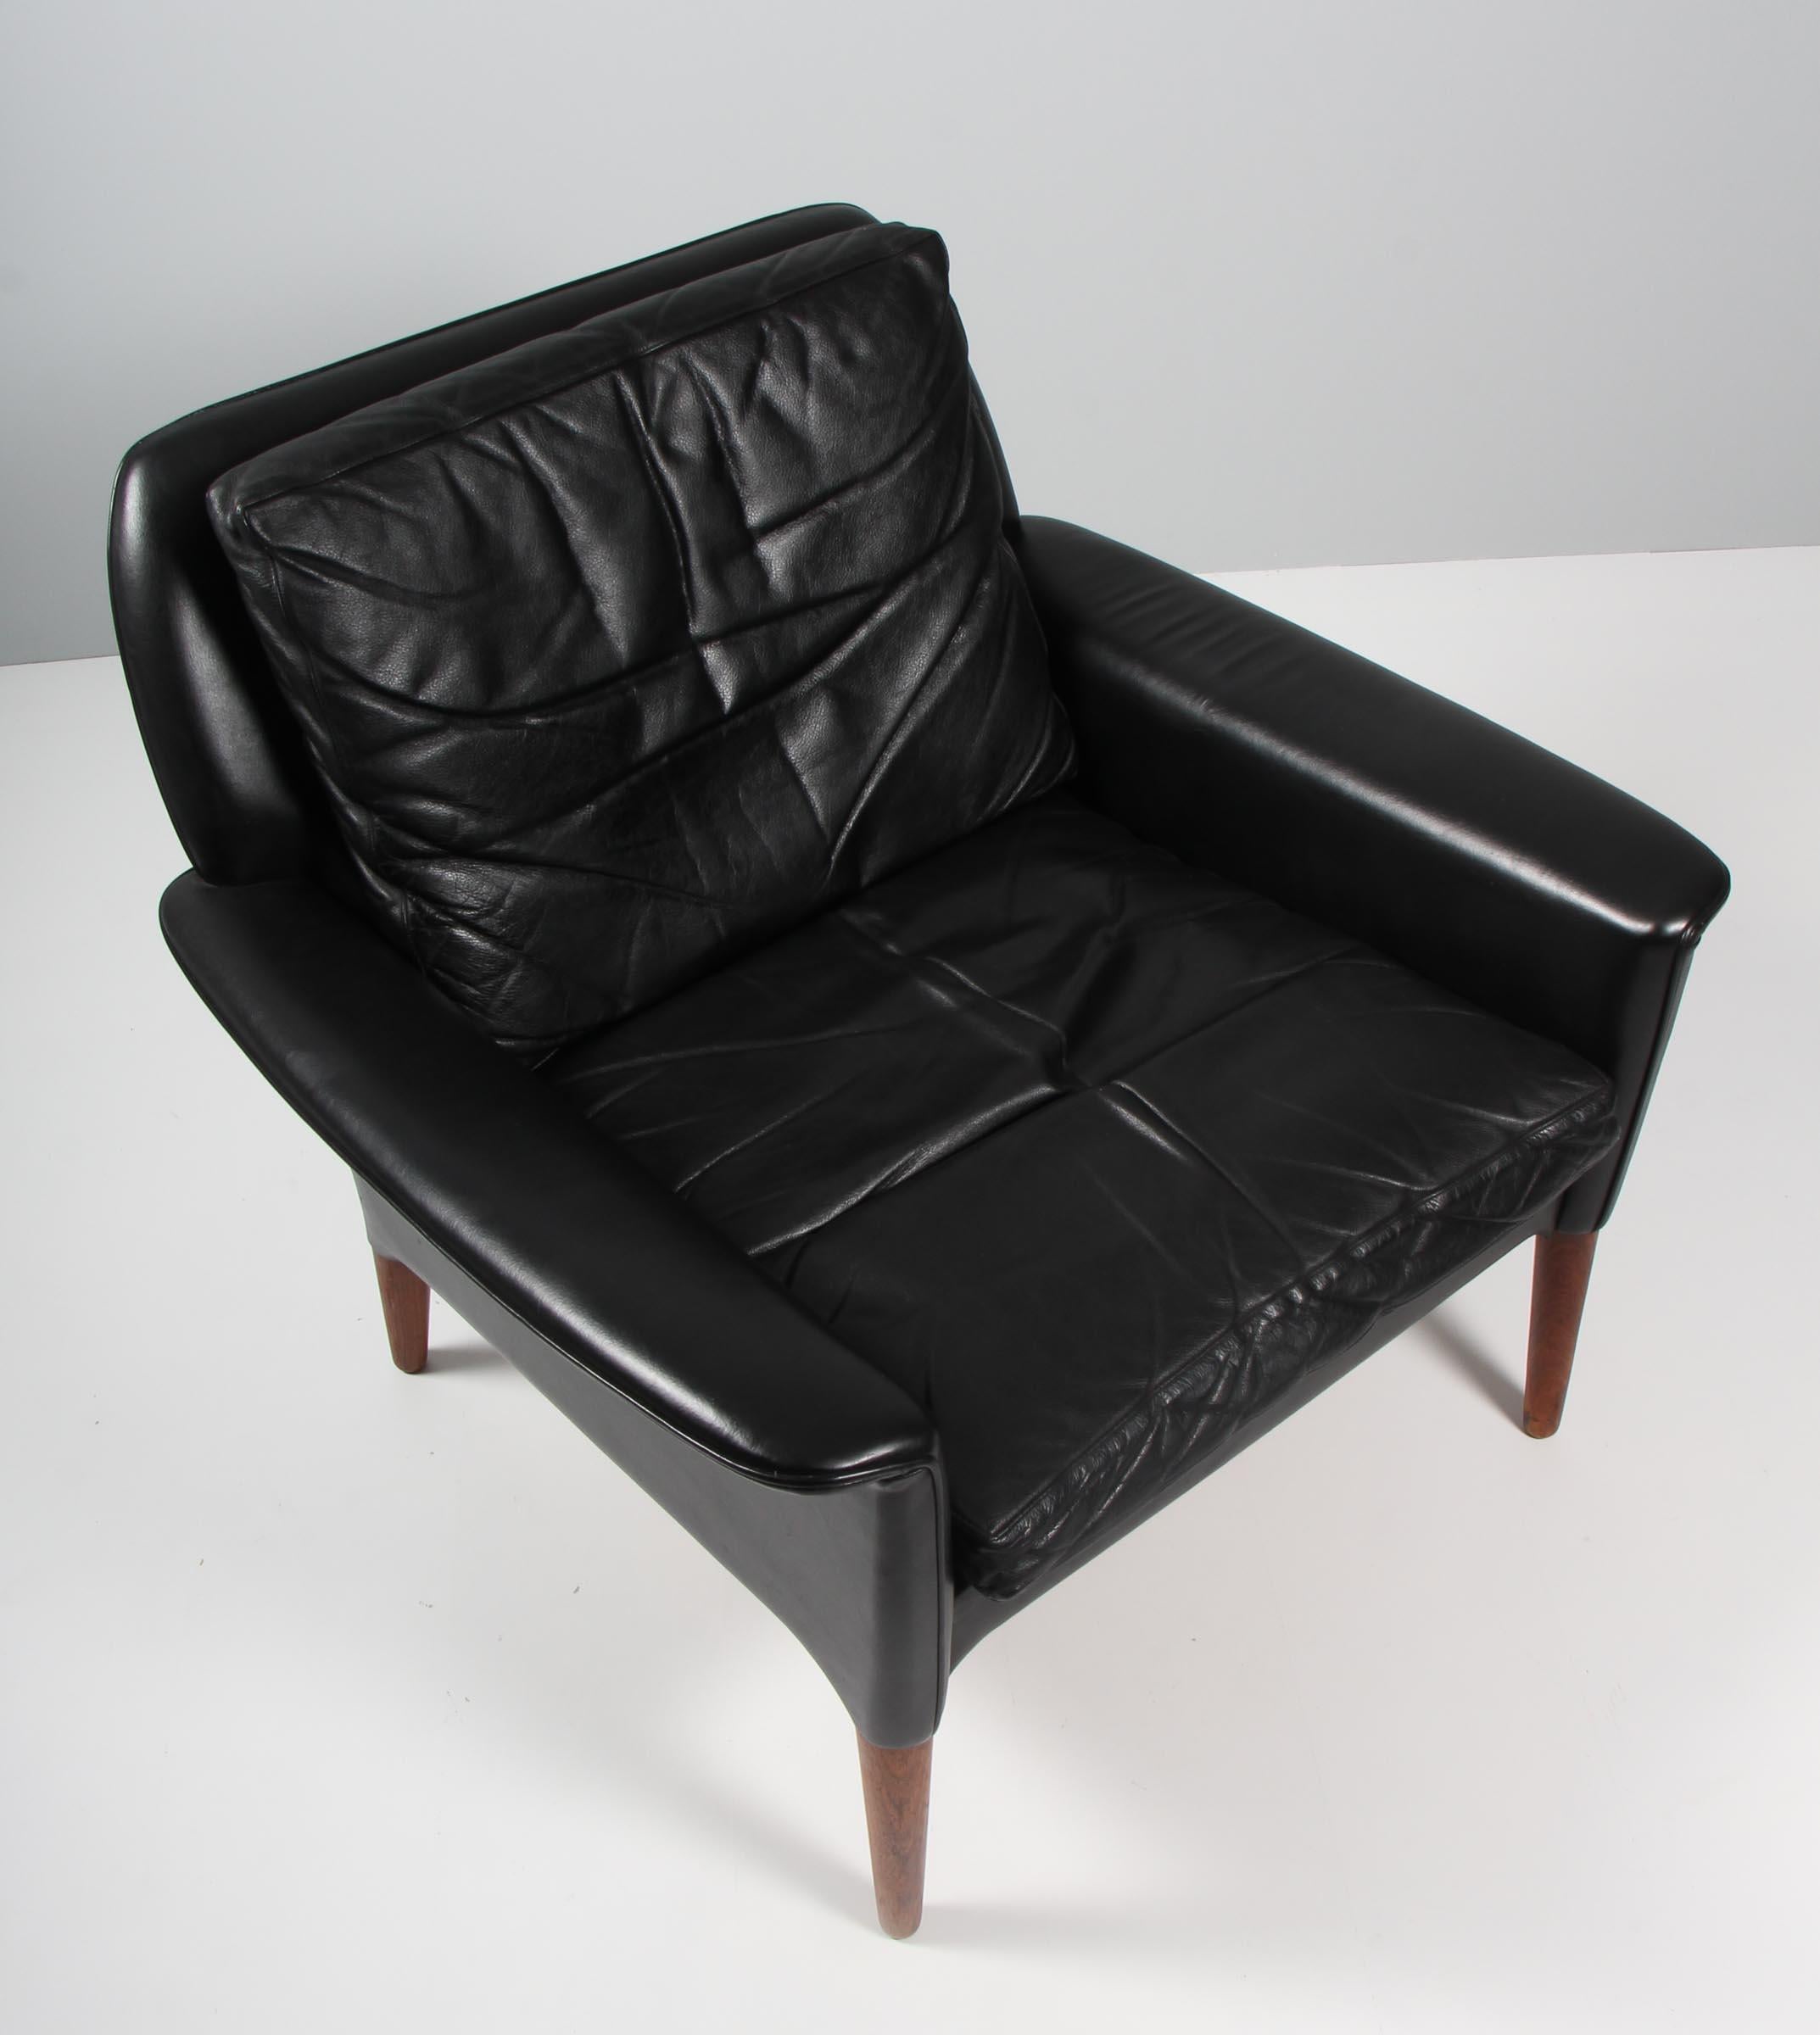 Hans Olsen lounge chair original upholstered with black leather.

Legs of rosewood.